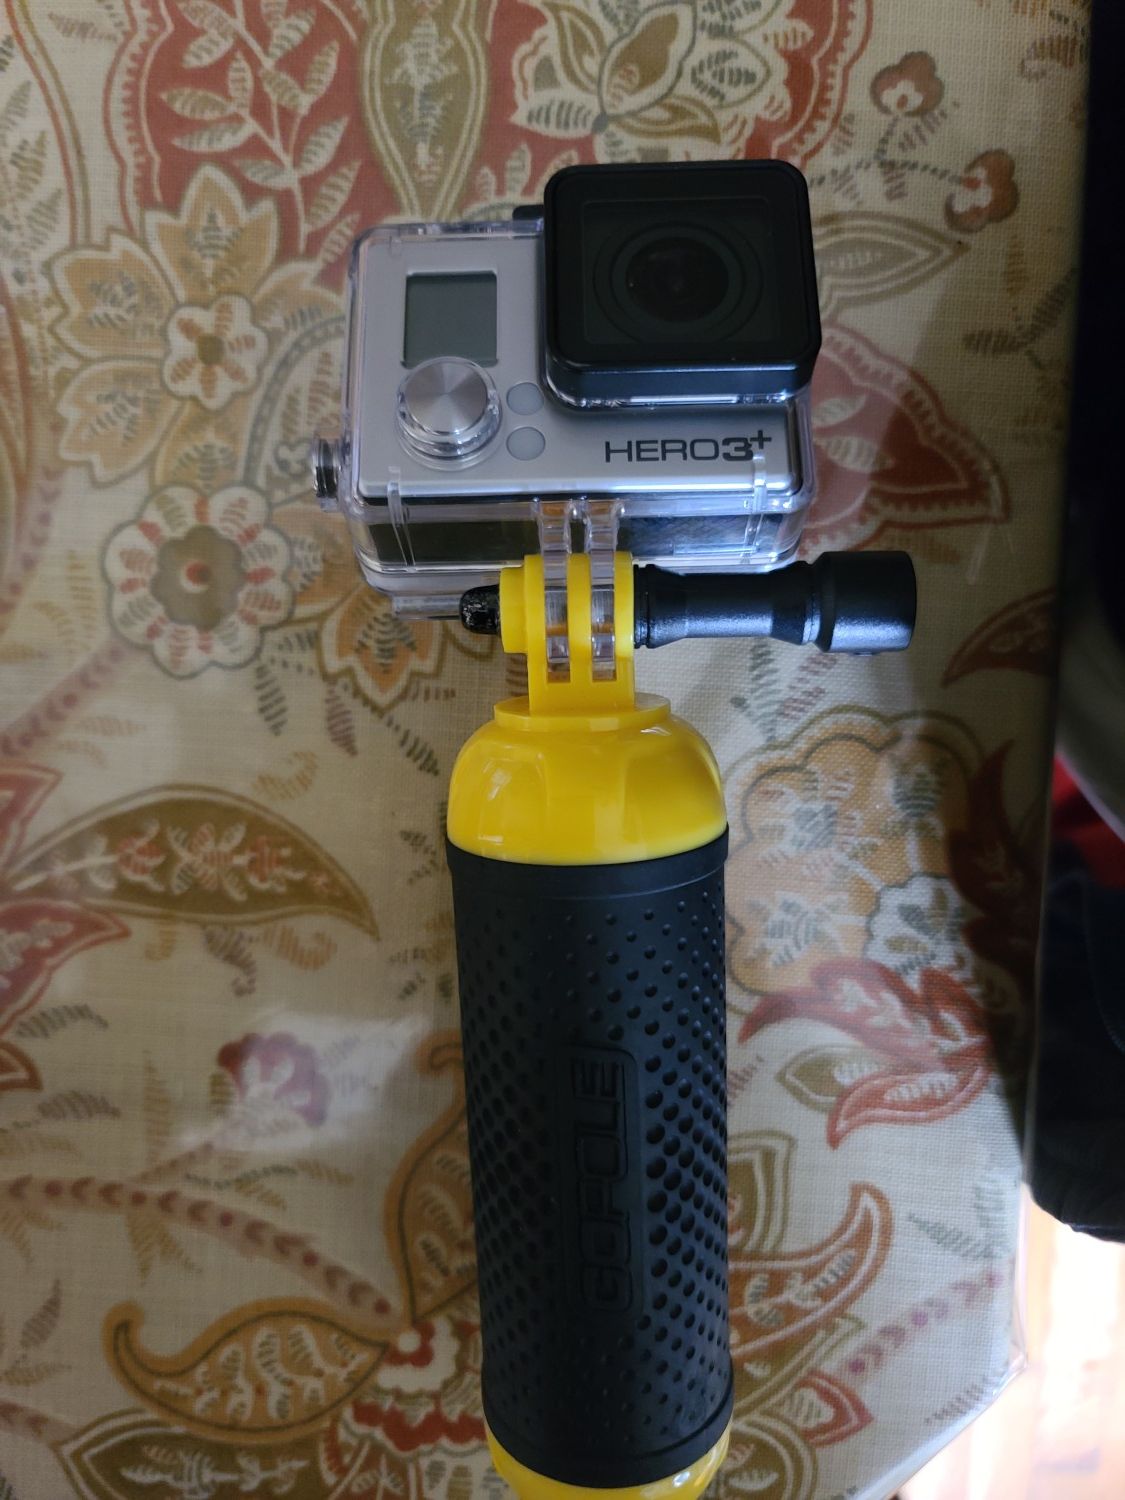 Gopro hero 3+ with extra battery